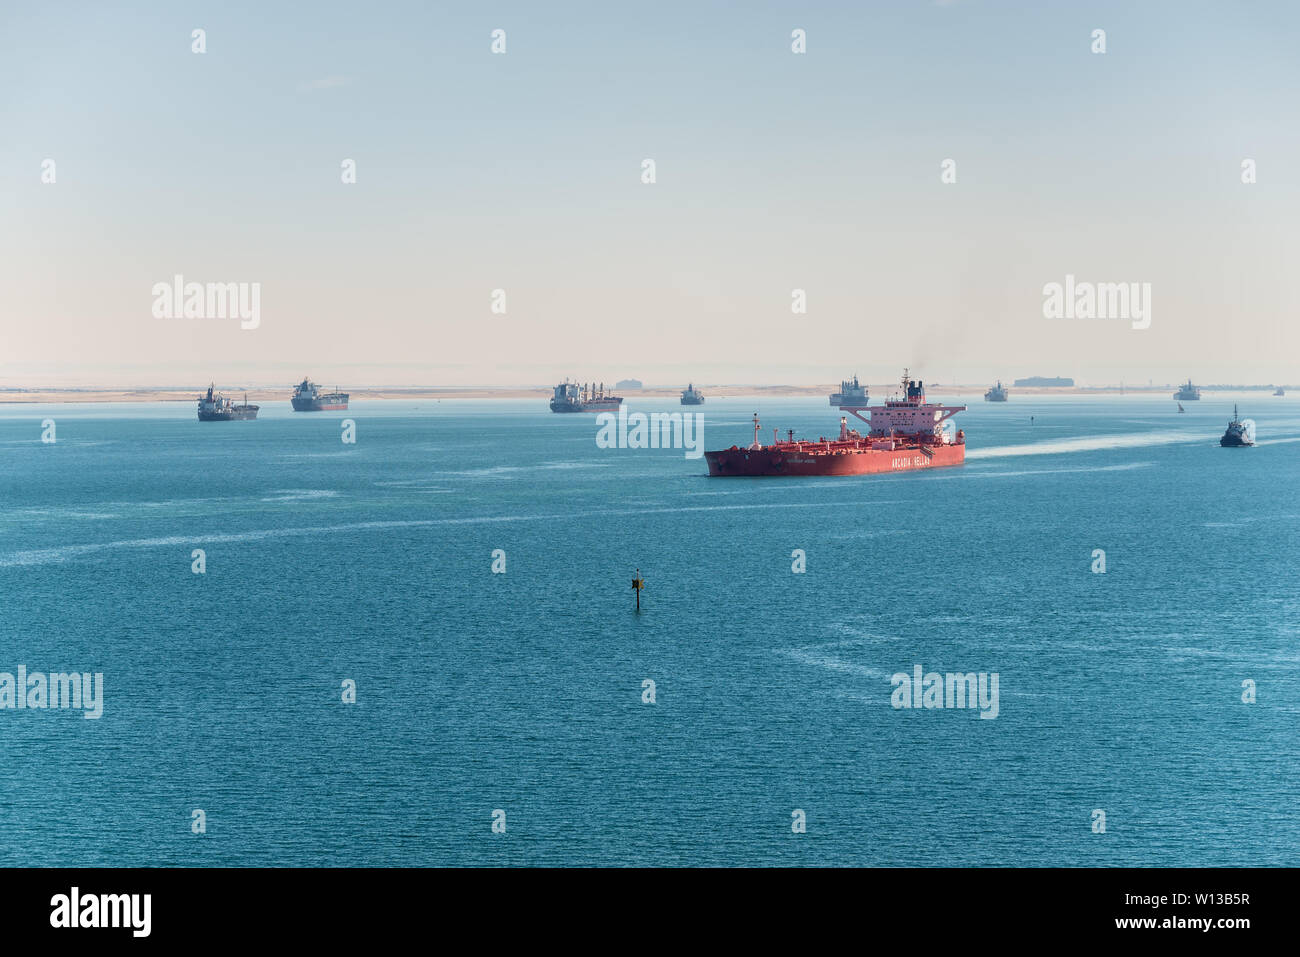 Suez, Egypt - November 5, 2017: Commercial ships southbound through the Great Bitter Lake and wait in line at anchor. This is where the North and Sout Stock Photo